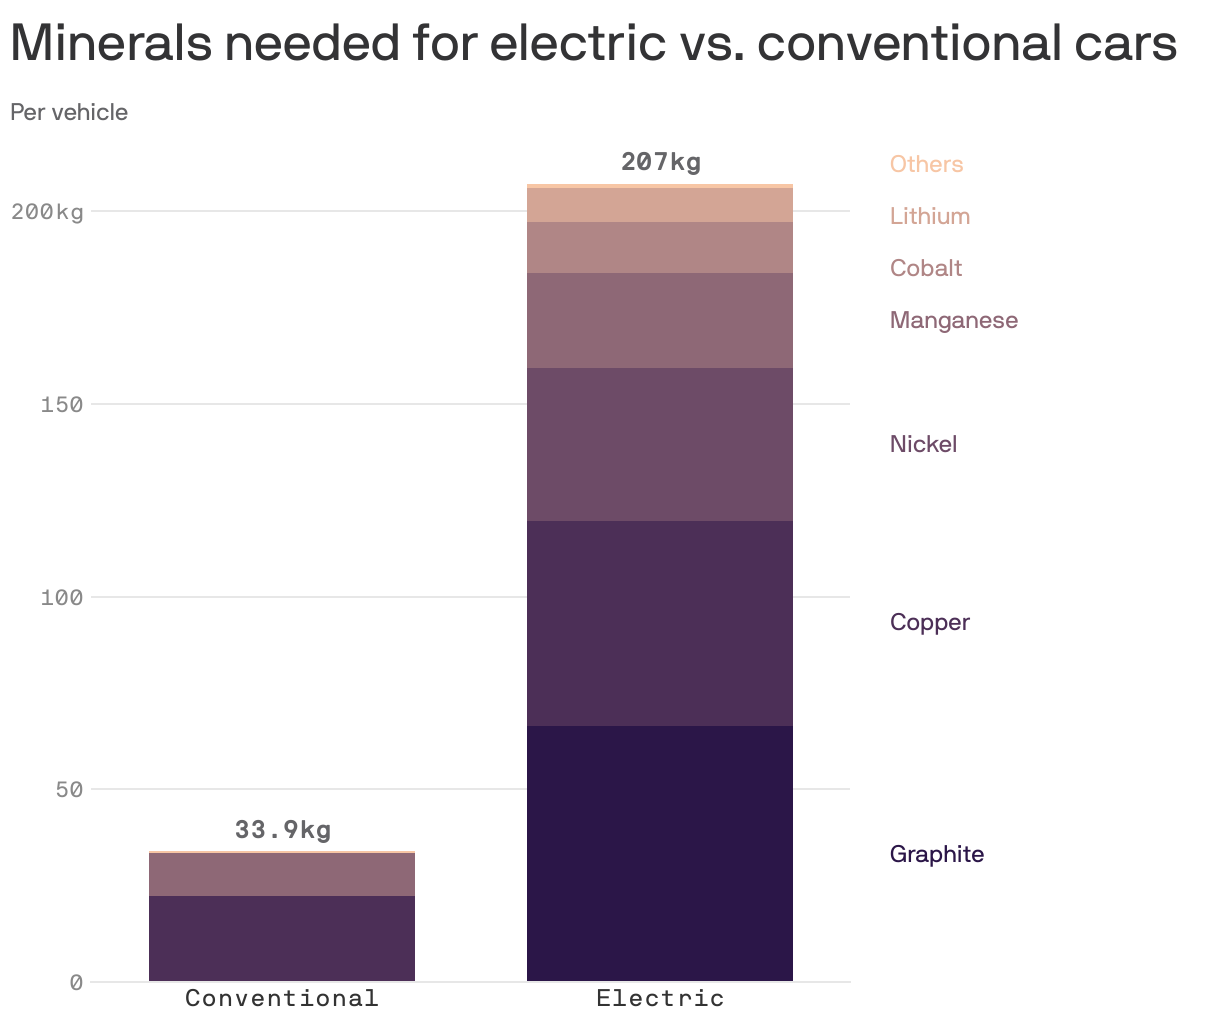 Minerals needed for electric vs. conventional cars